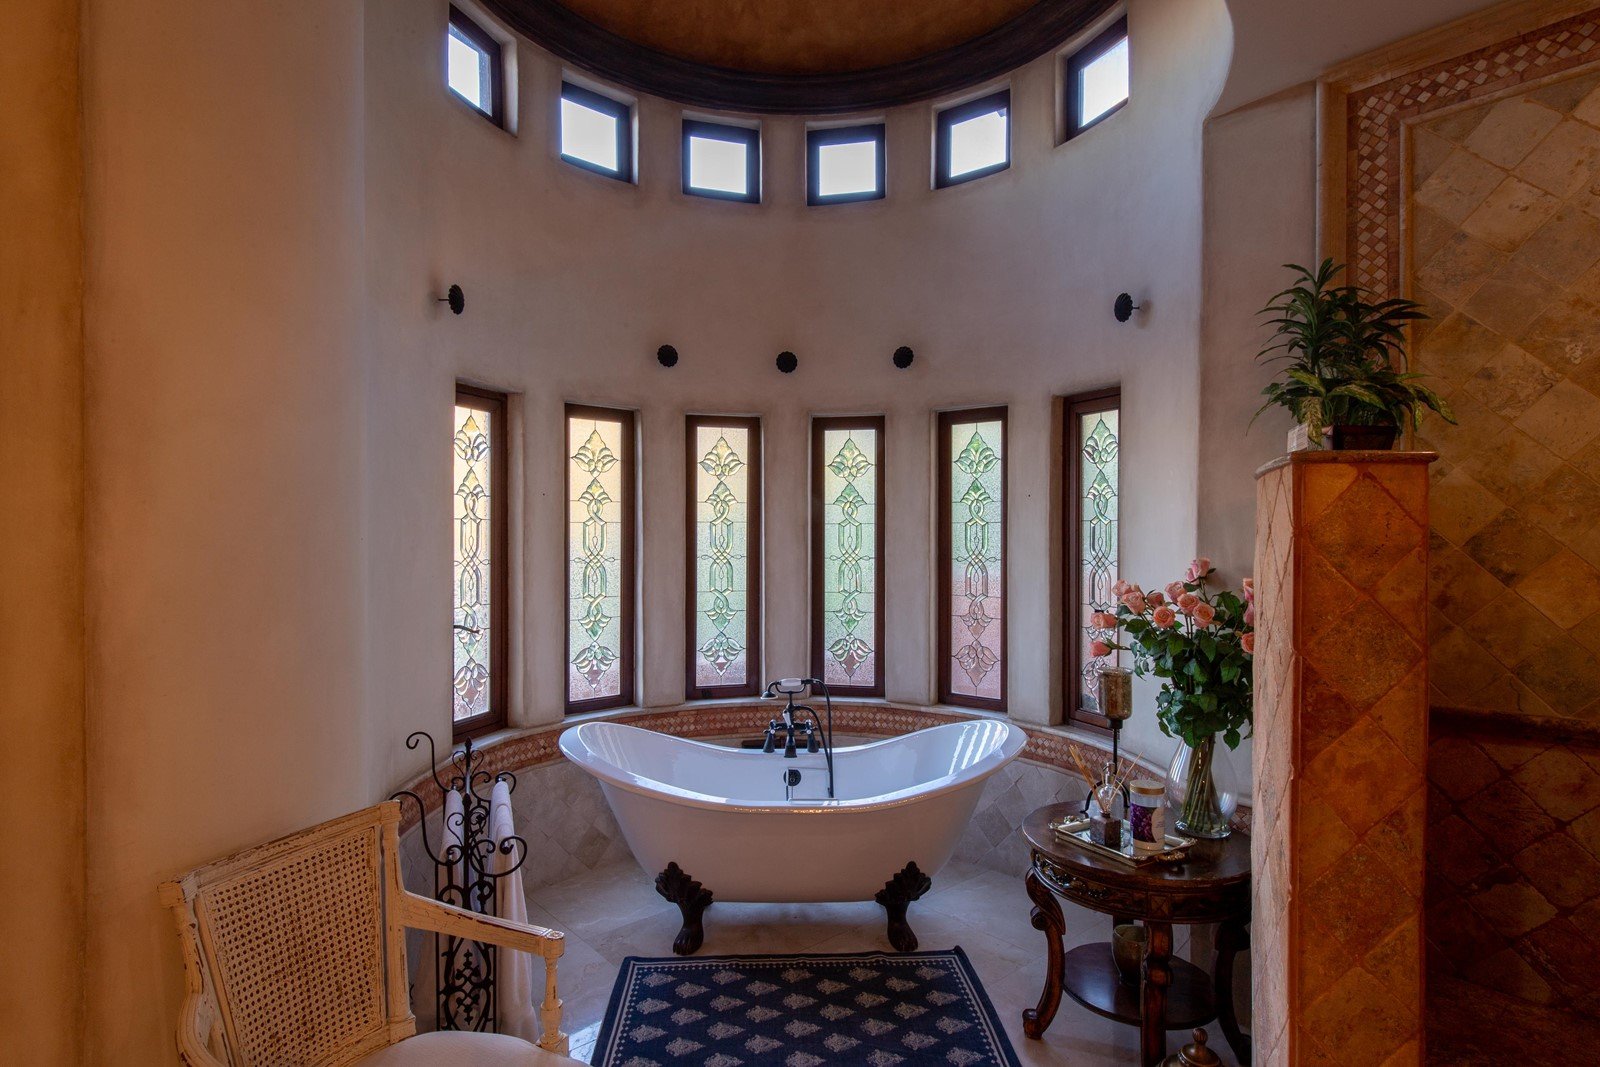 A standing bathtub in one of the large bathrooms in the villa.